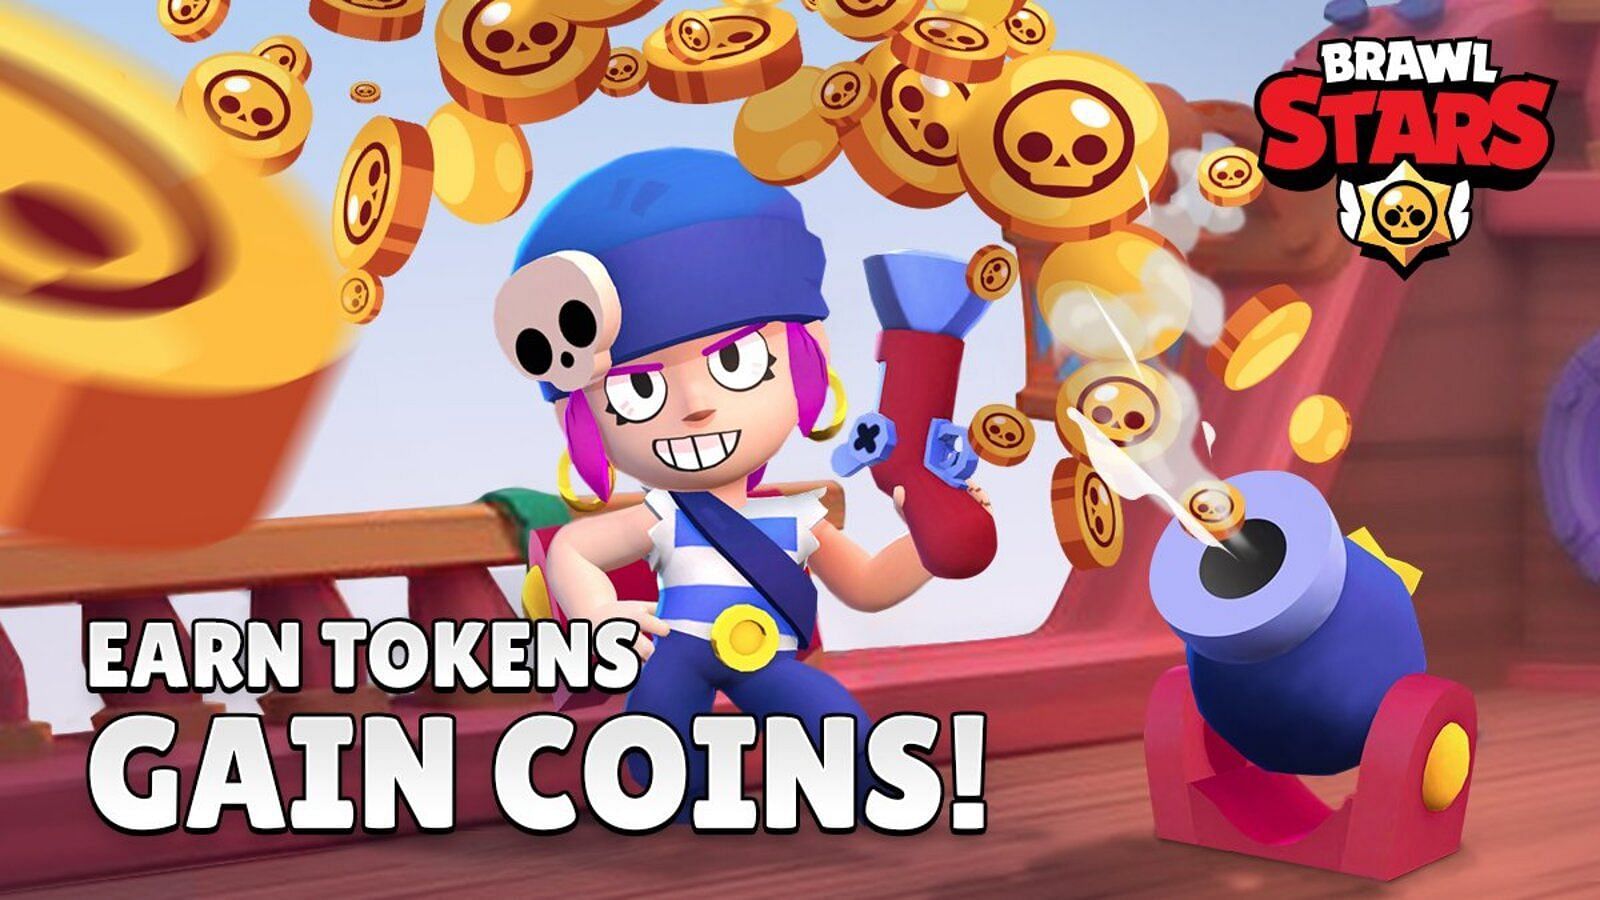 Coins in Brawl Stars (Image via Supercell)